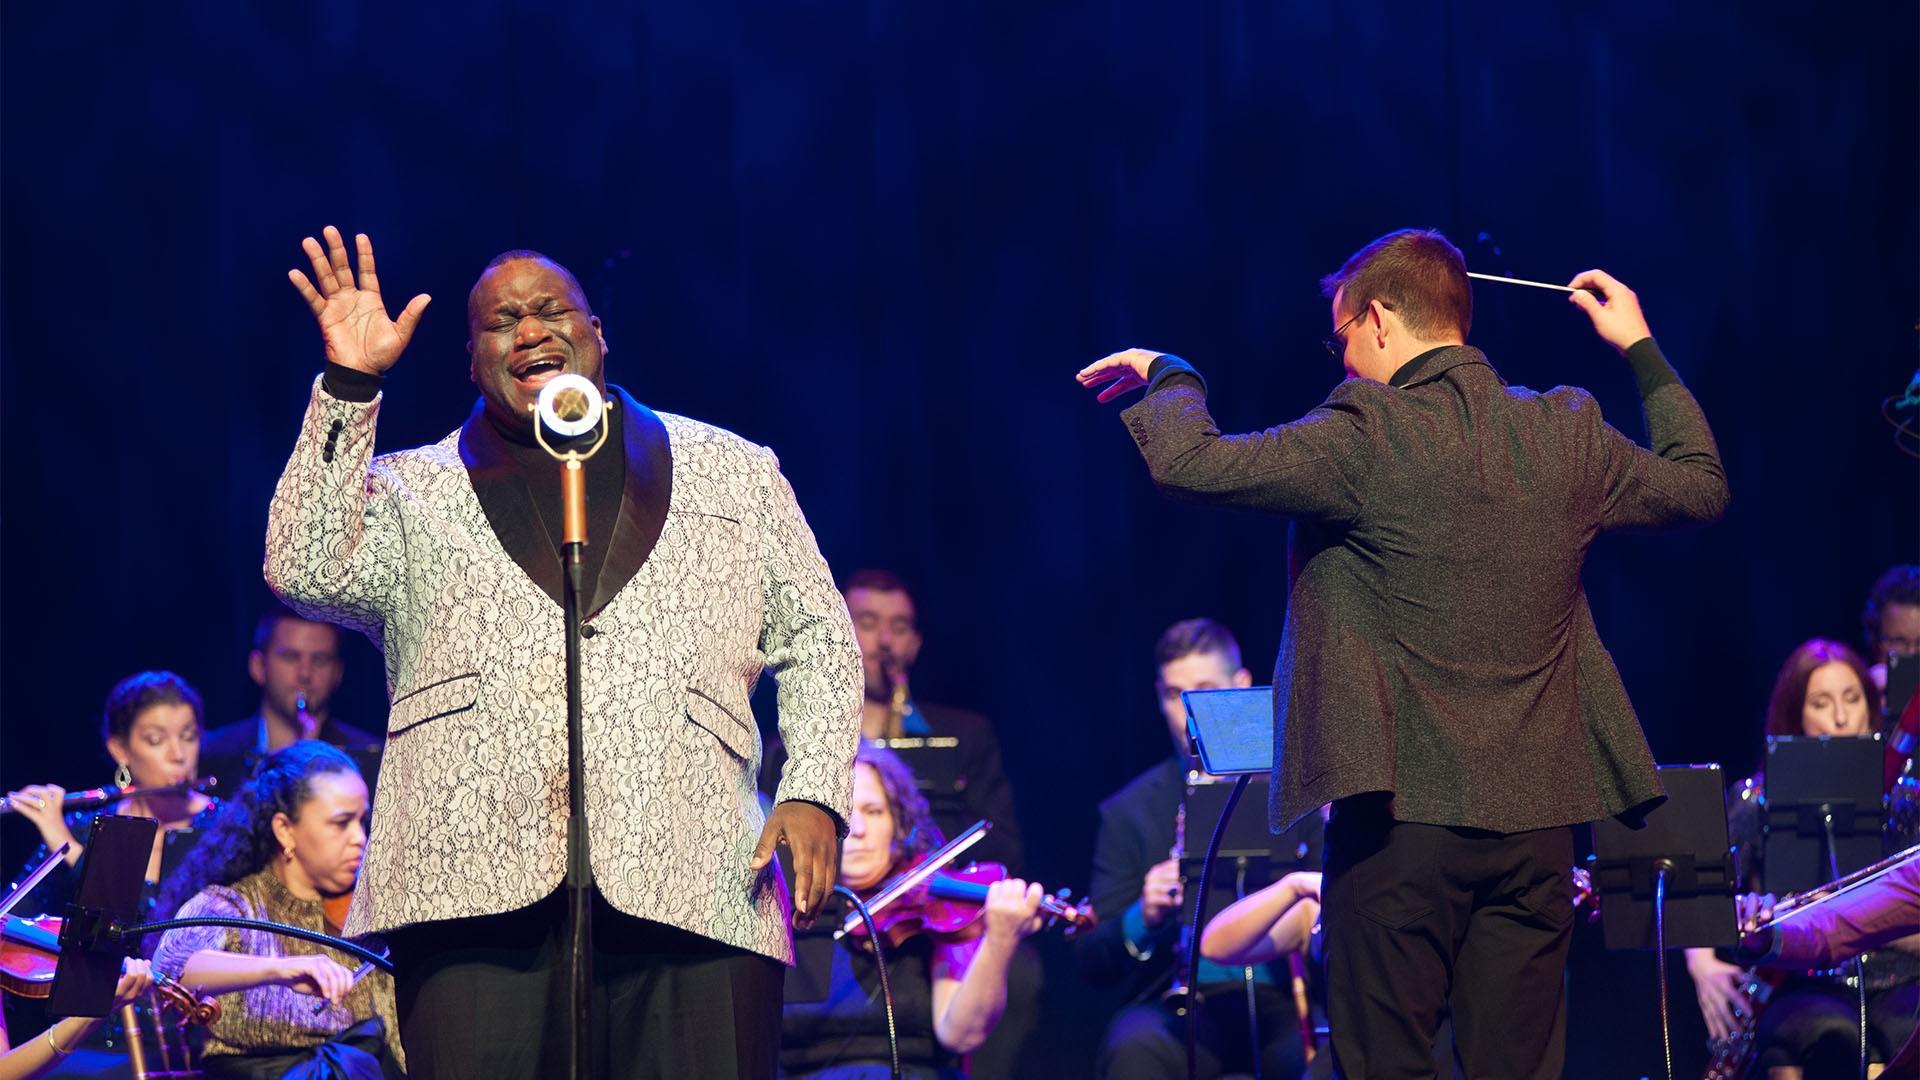 Reginald Smith performing with APO at People's Bank Theater in Marietta, Ohio.